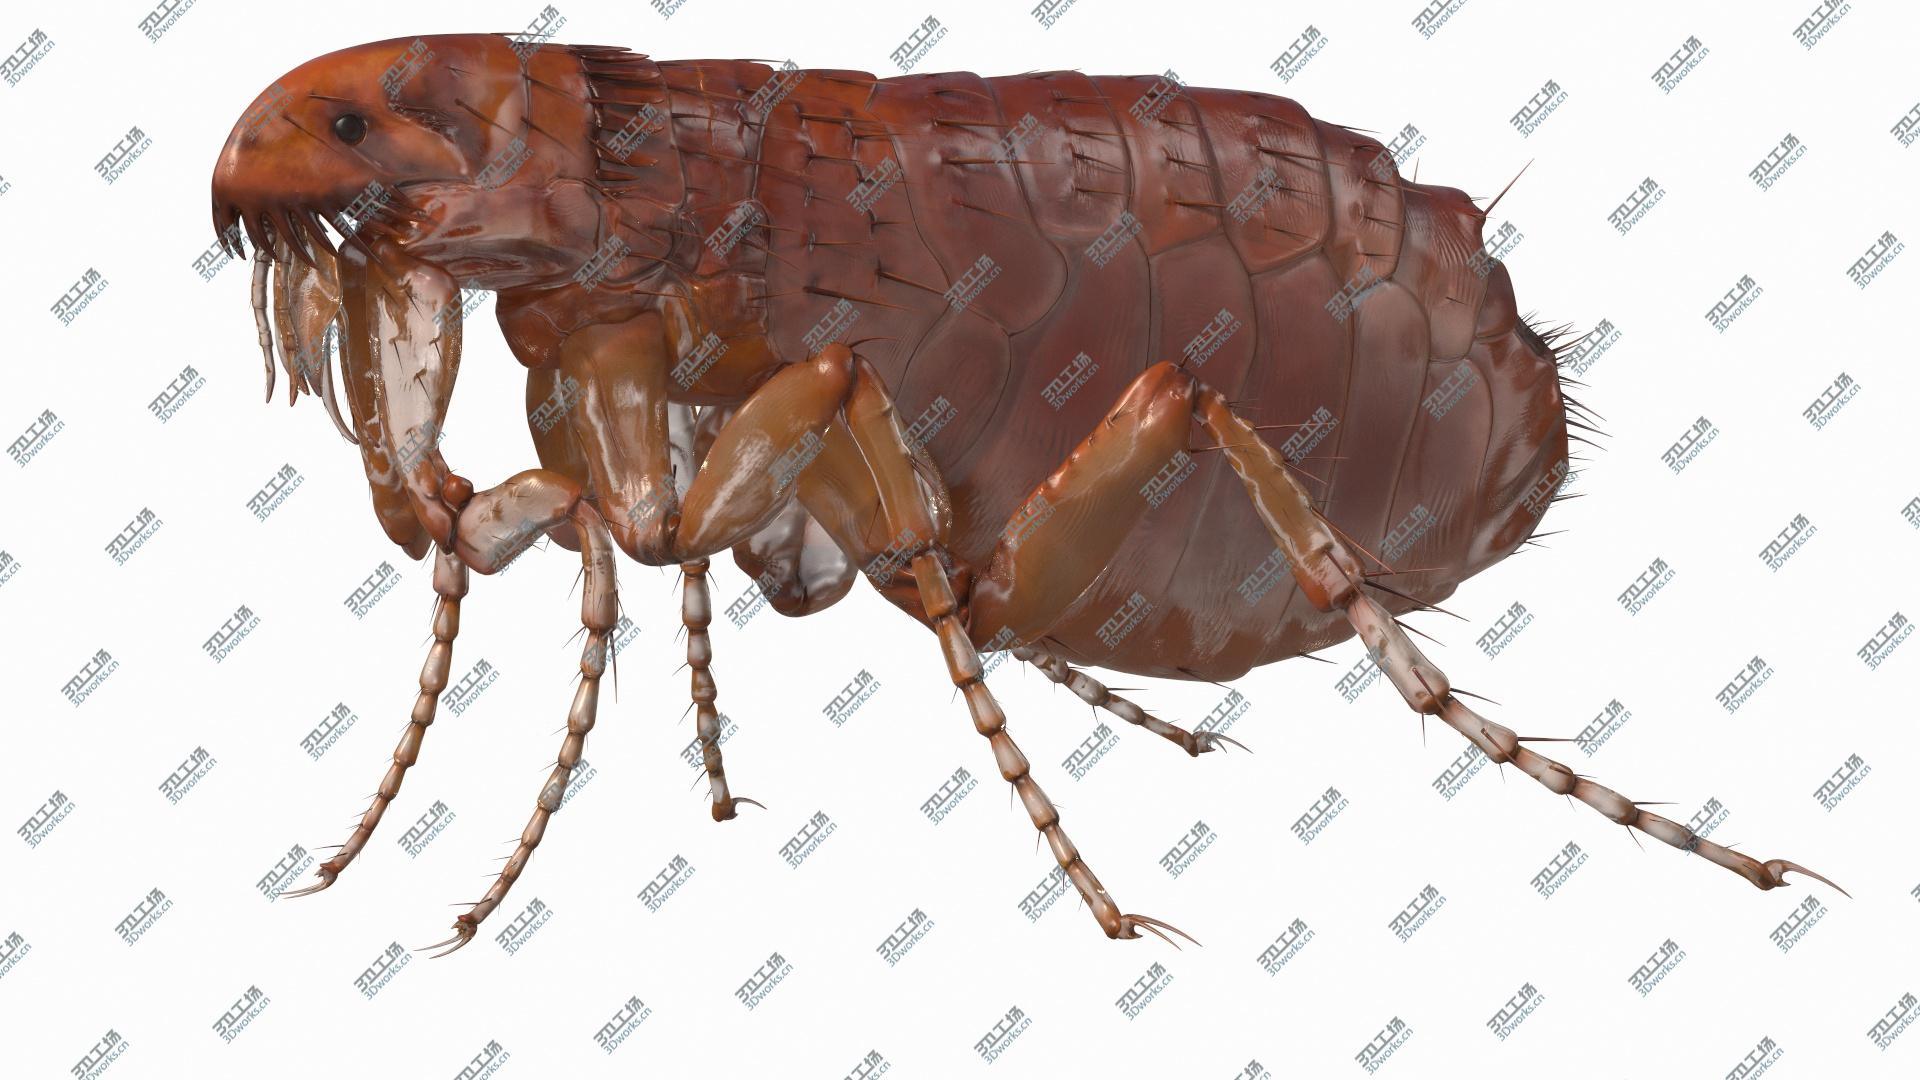 images/goods_img/202104093/3D Flea Insect Rigged model/2.jpg